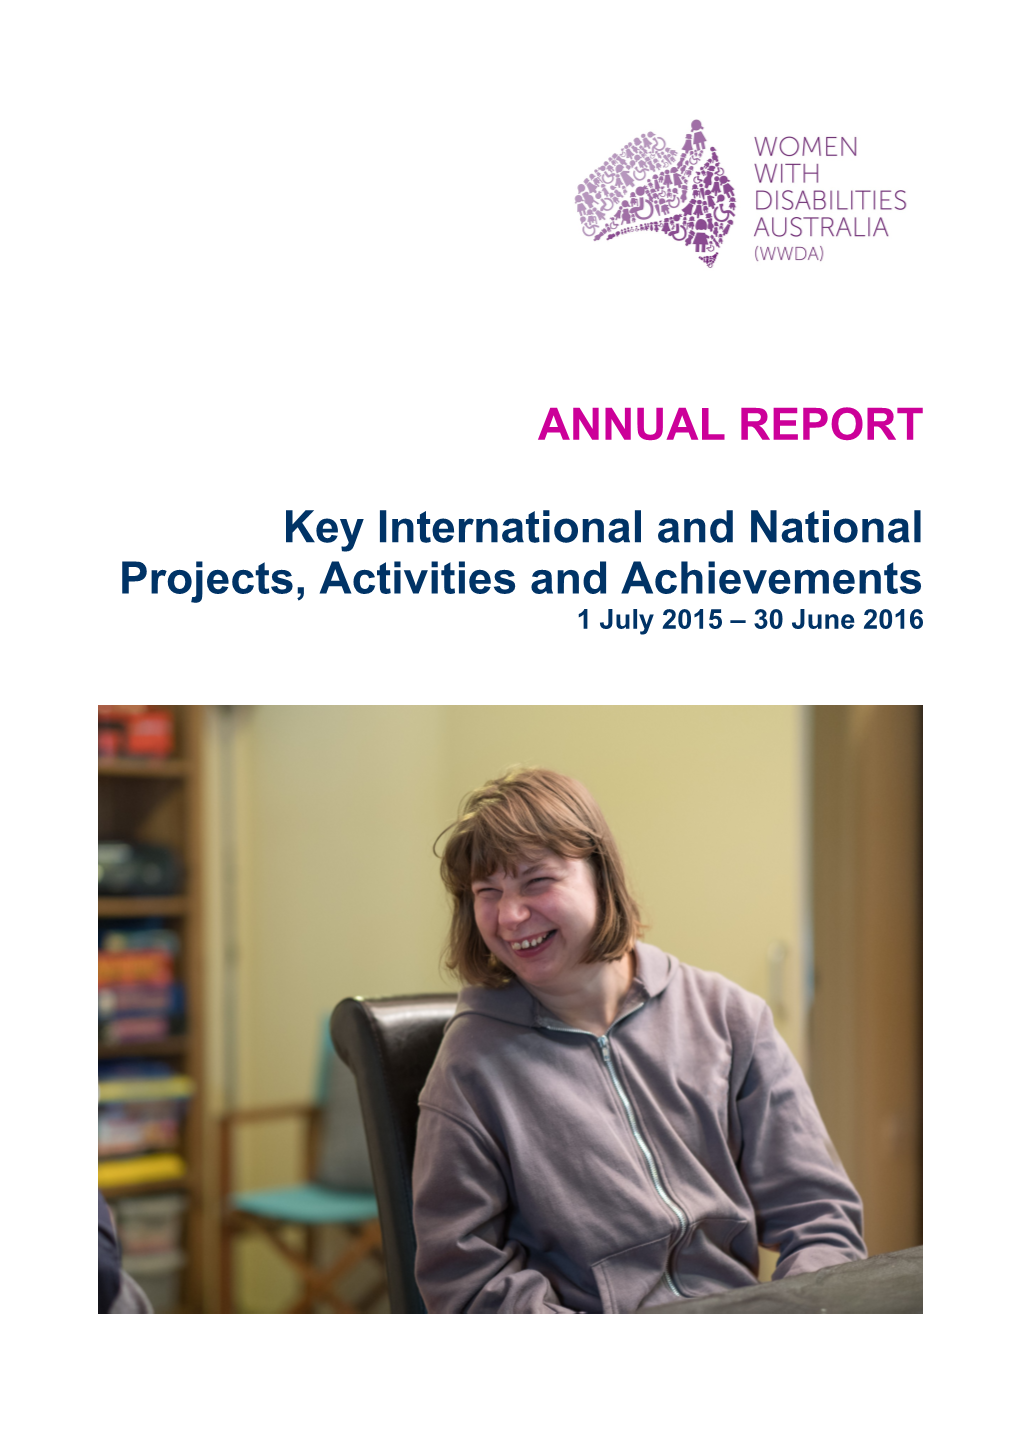 Key International and National Projects, Activities and Achievements